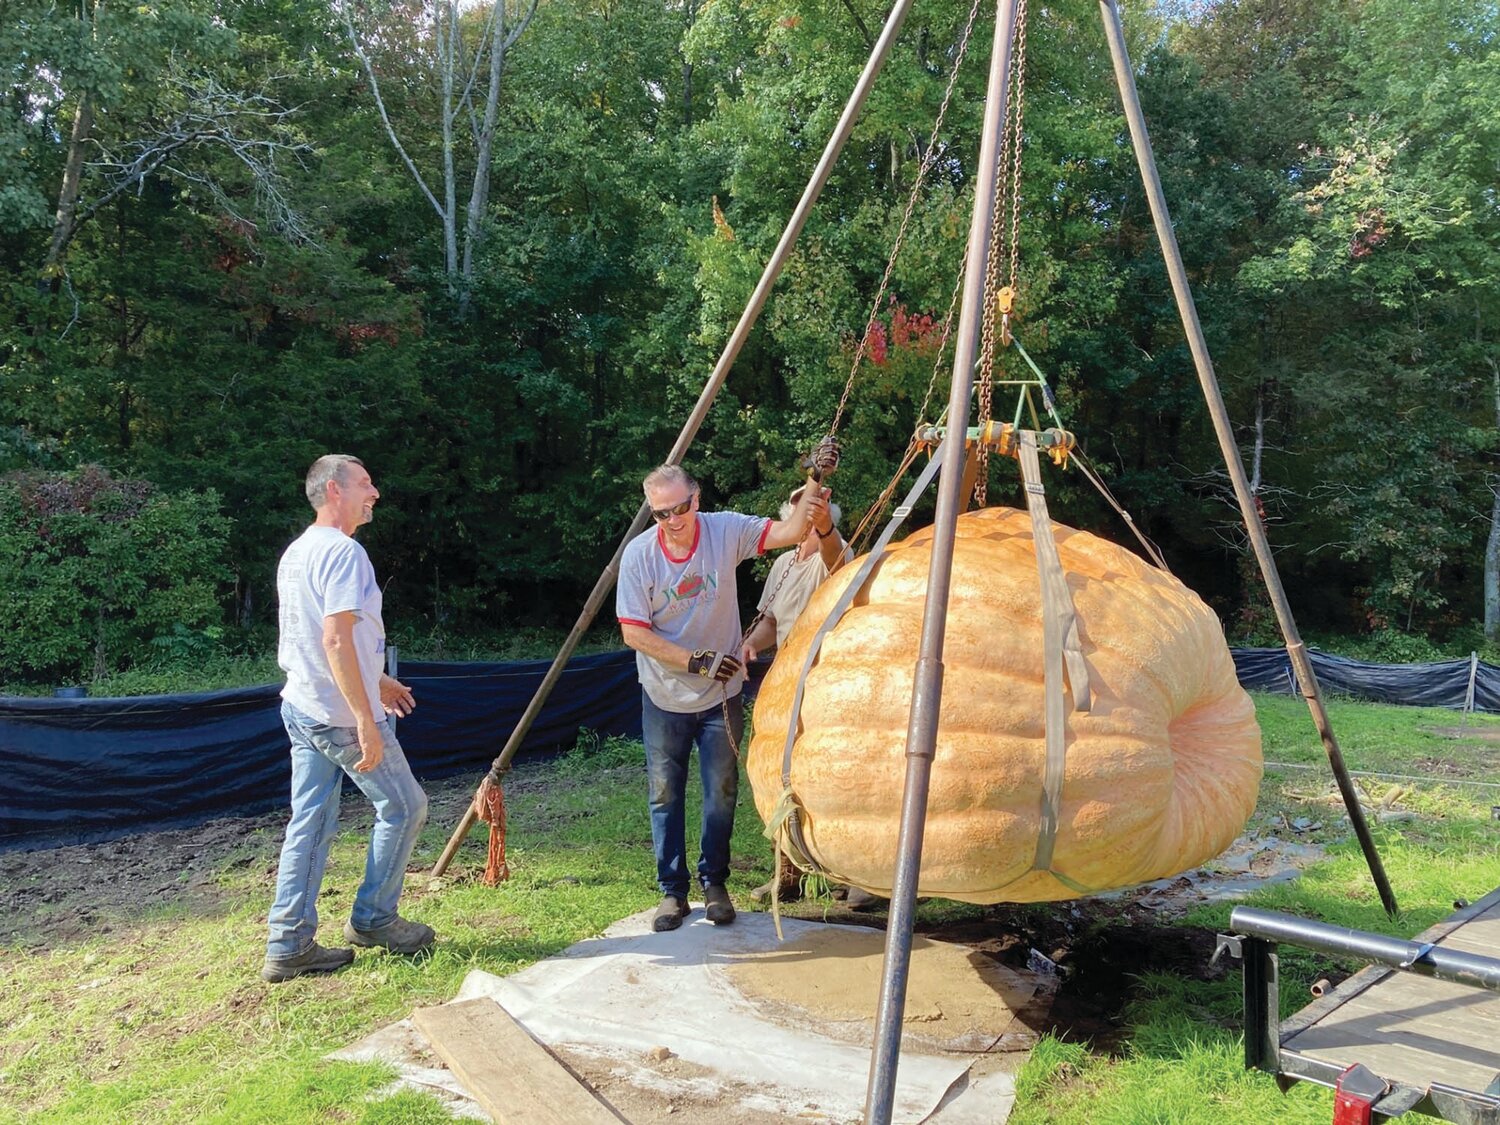 MONSTER MELON: Most of Steve Sperry’s pumpkins weigh a ton, literally. Here he hoists one of his monsters from his backyard garden. The pumpkin went on to win first place at the Topsfield Fair in Massachusetts.